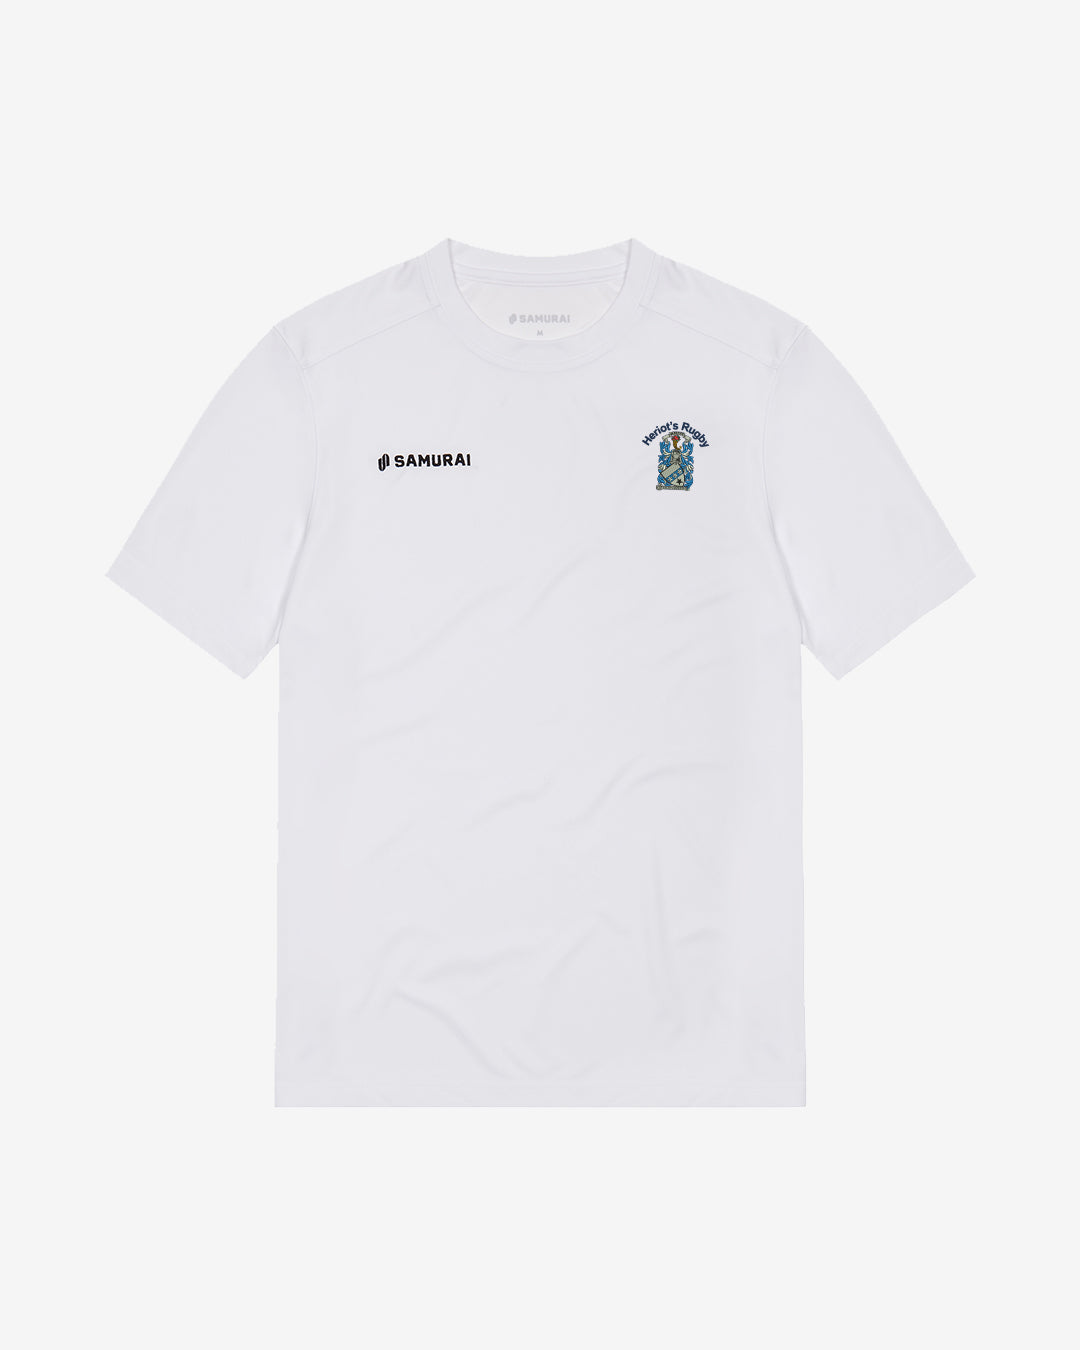 Heriot's Rugby Club - EP:0110 - Performance Tee 2.1 - White